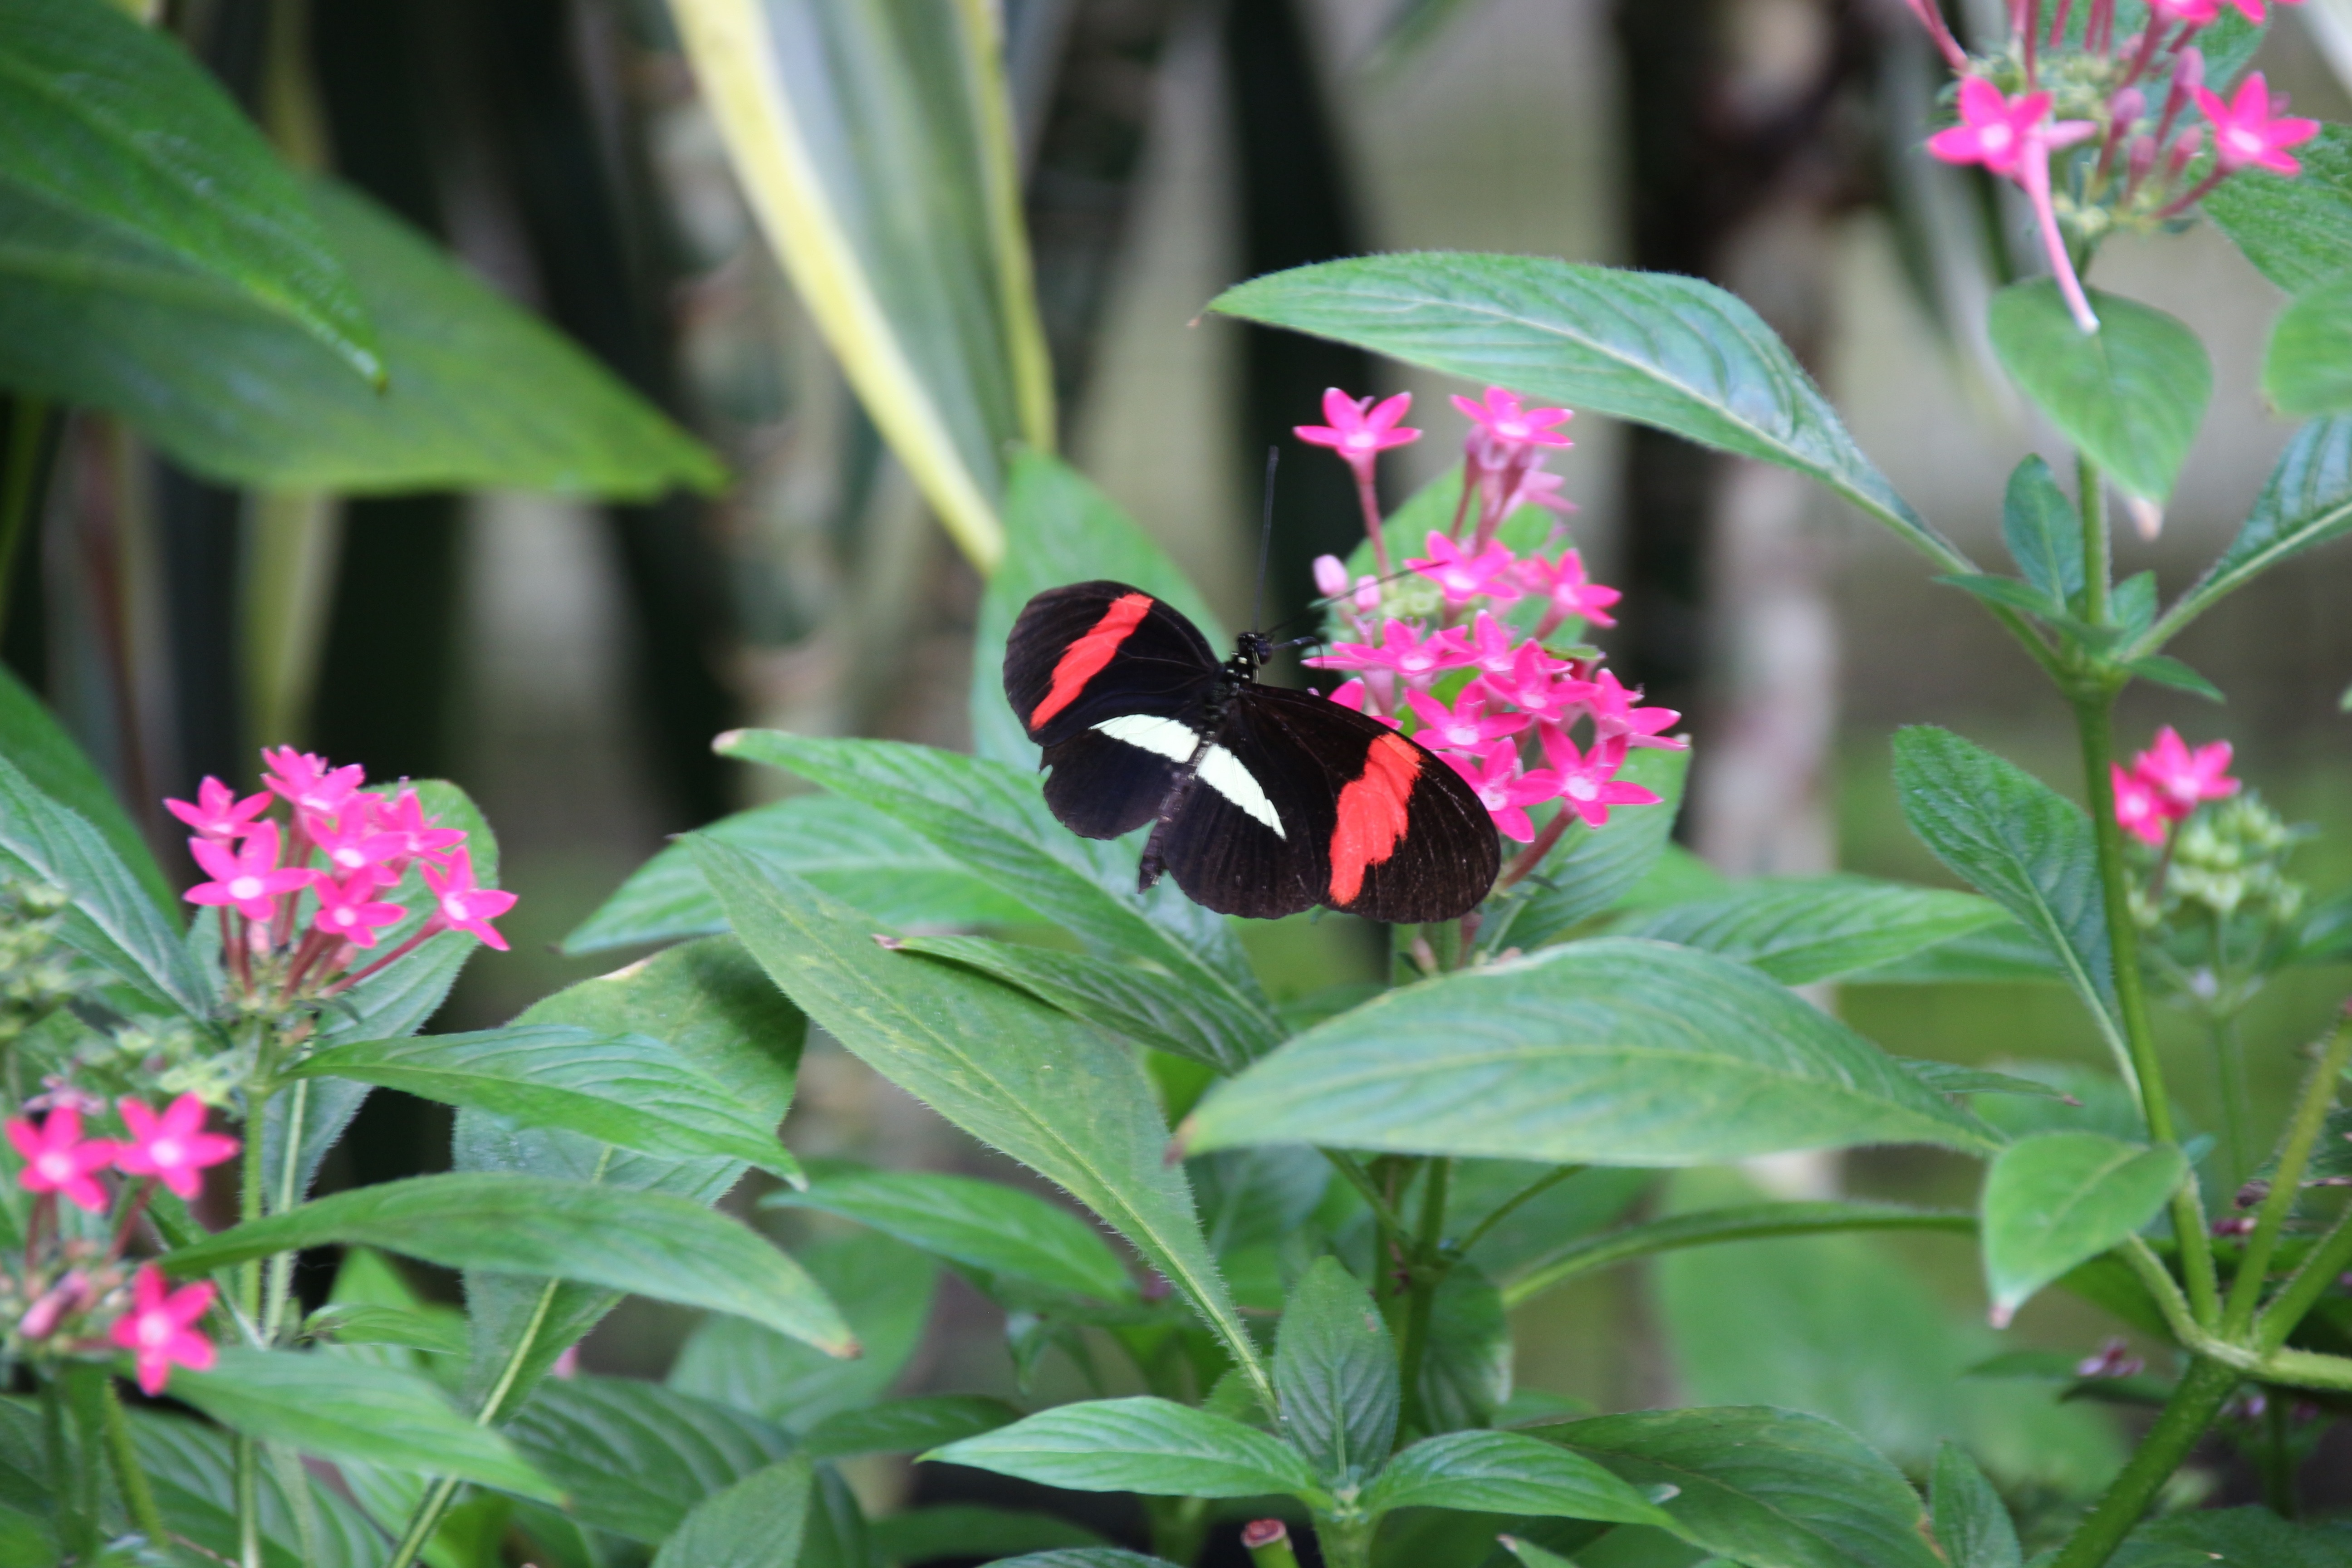 pink petaled flower and black butterfly